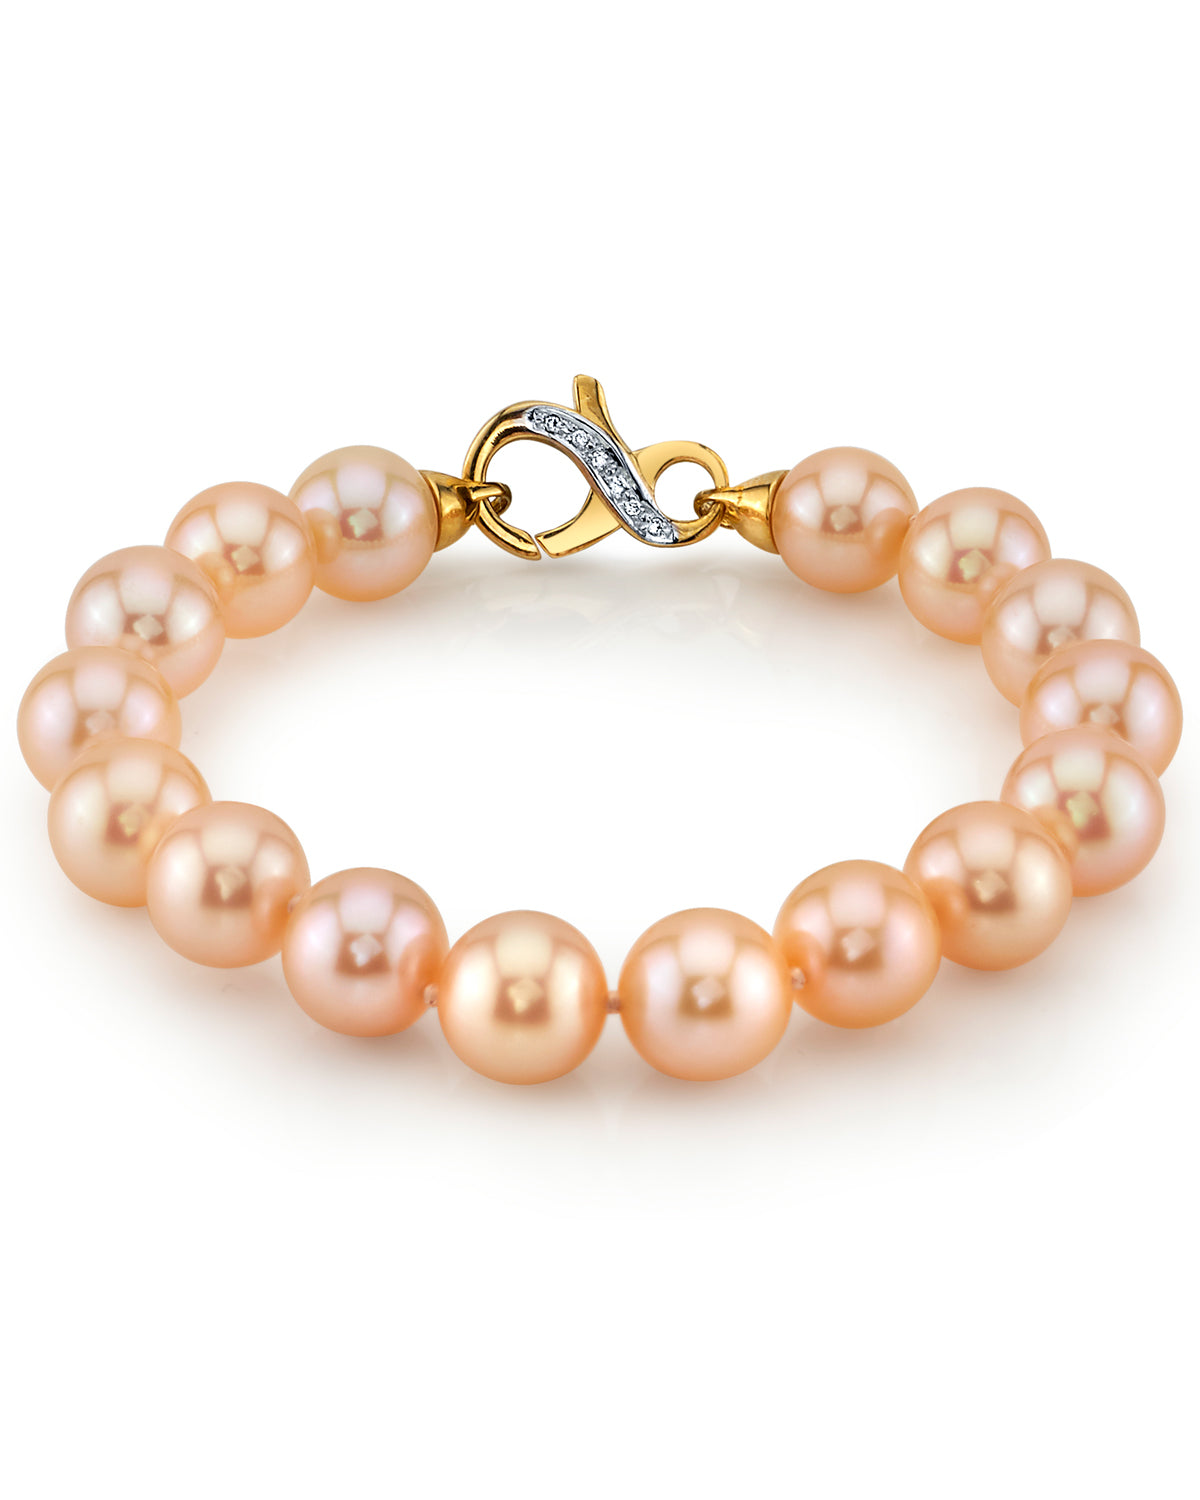 9.5-10.5mm Peach Freshwater Pearl Bracelet - Secondary Image